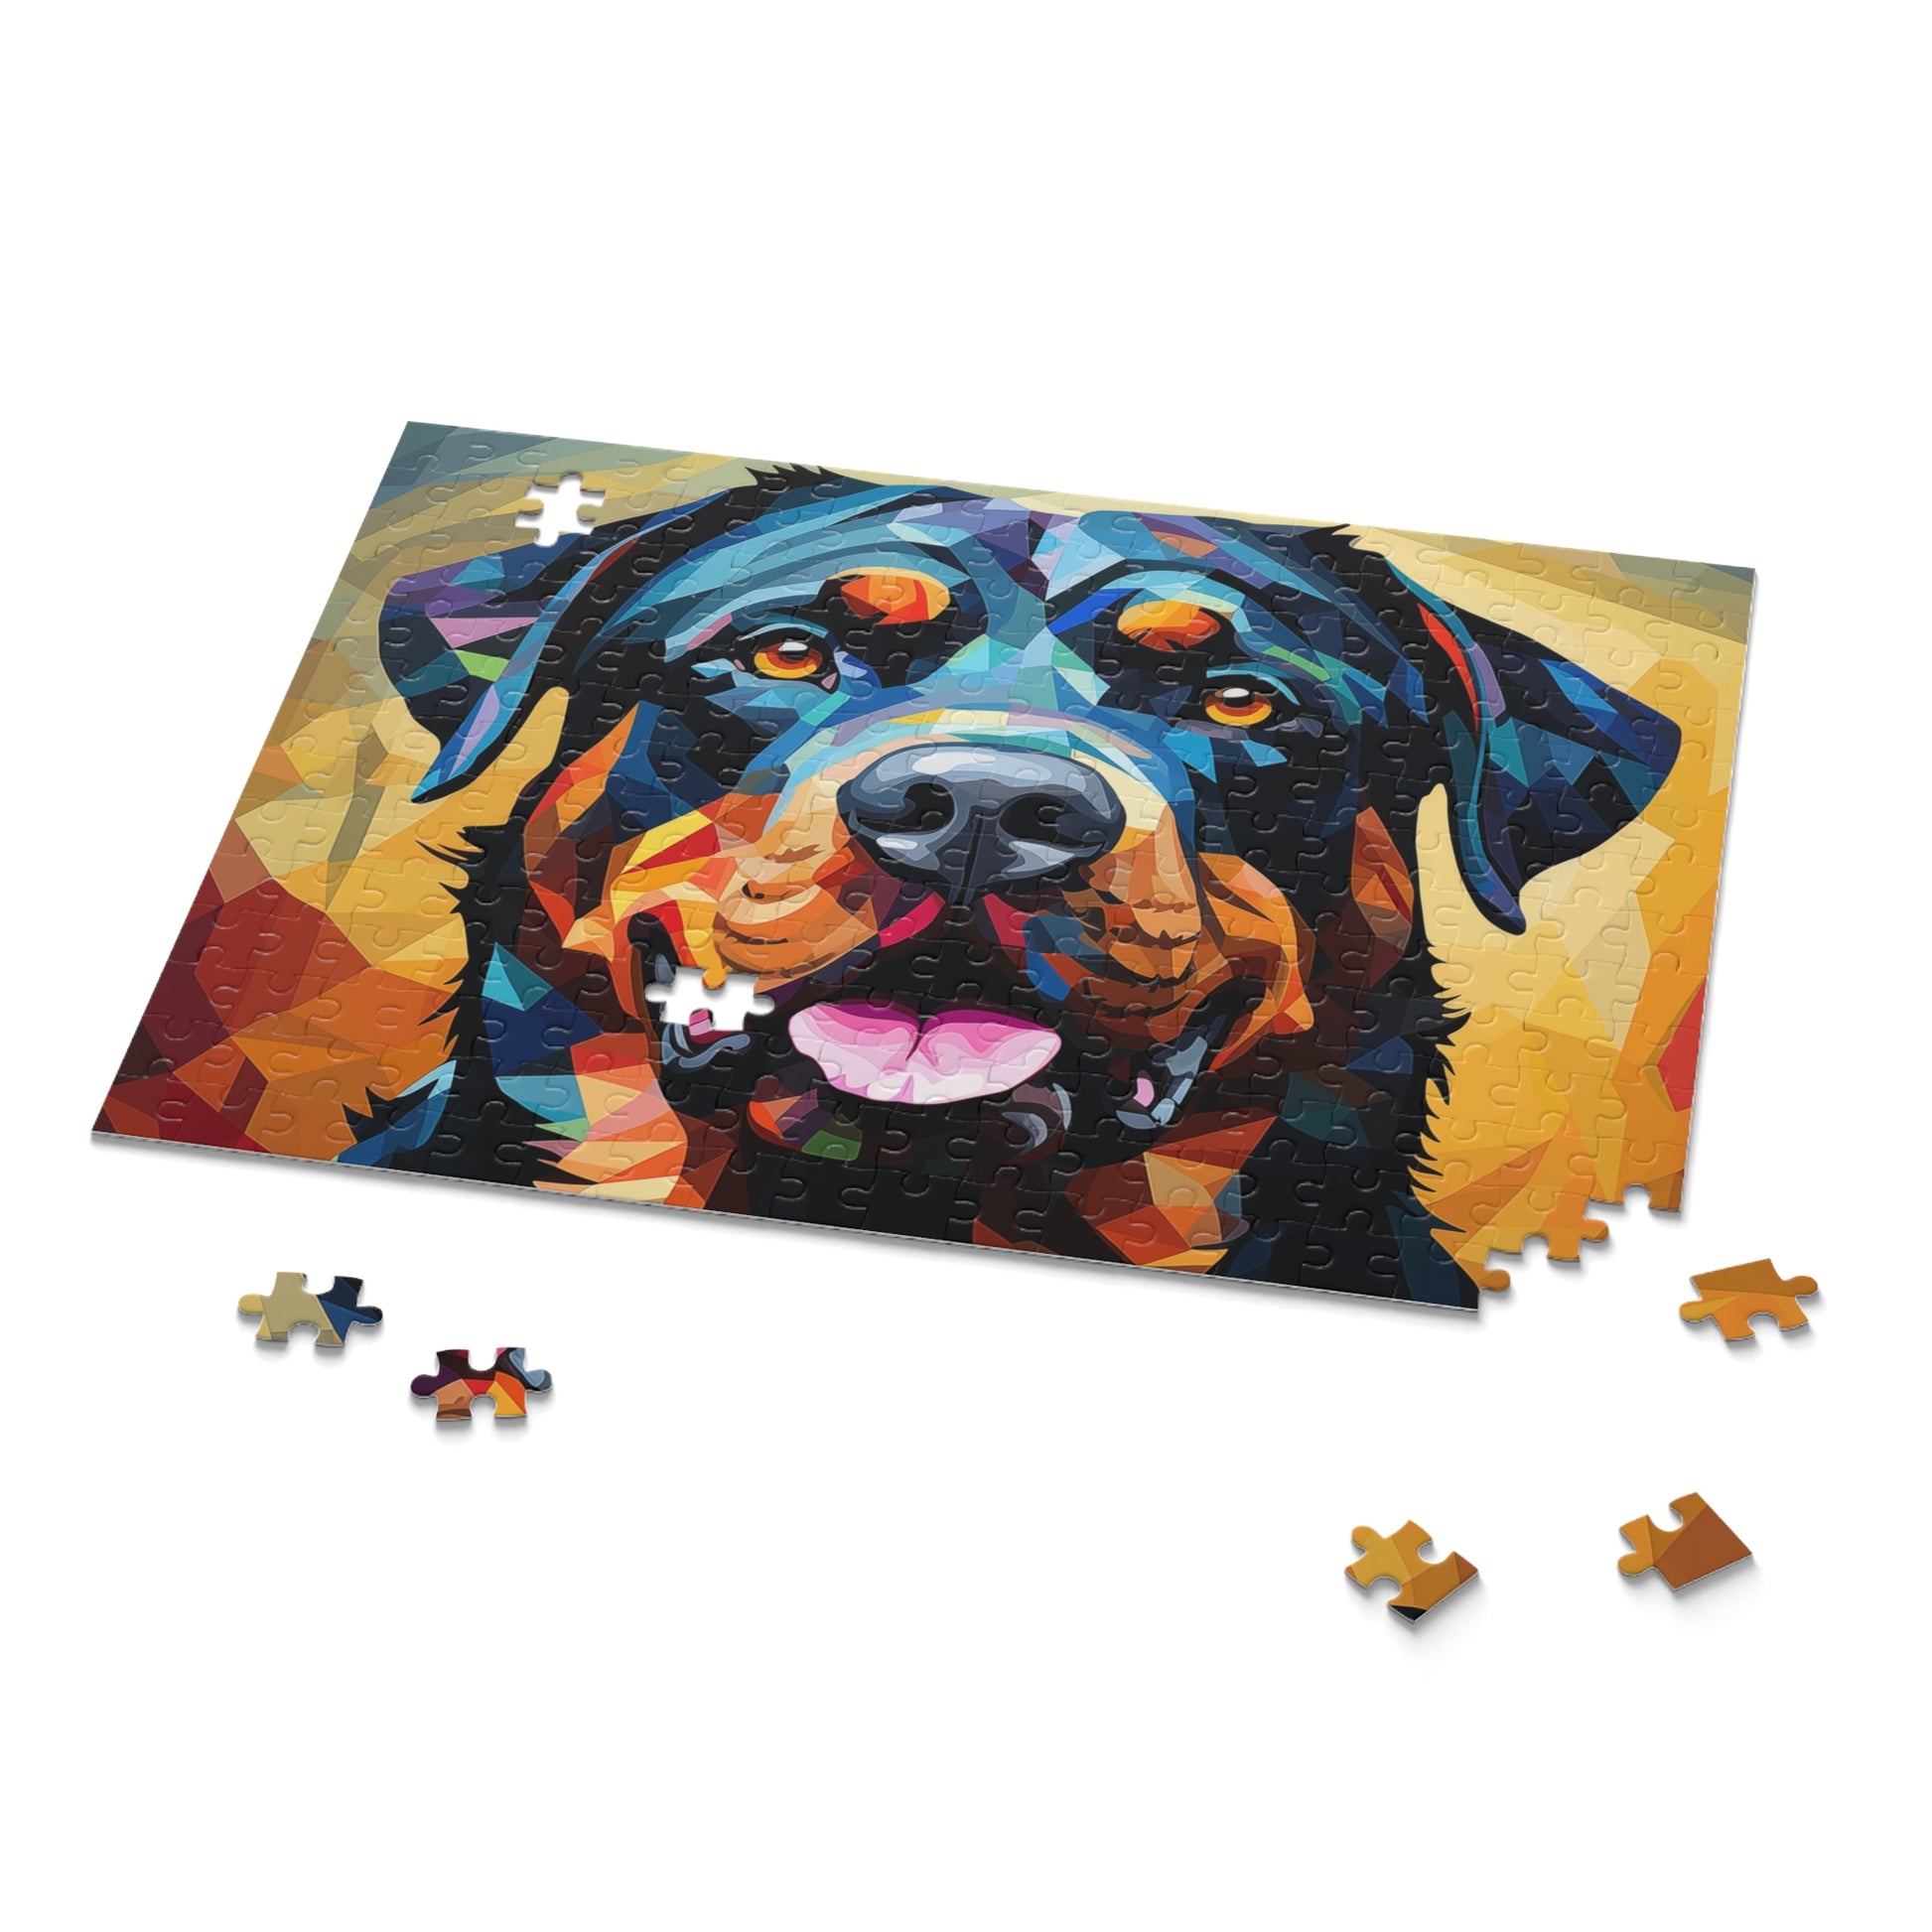 Rottweiler Vibrant Abstract Dog Jigsaw Puzzle Oil Paint Adult Birthday Business Jigsaw Puzzle Gift for Him Funny Humorous Indoor Outdoor Game Gift For Her Online-9